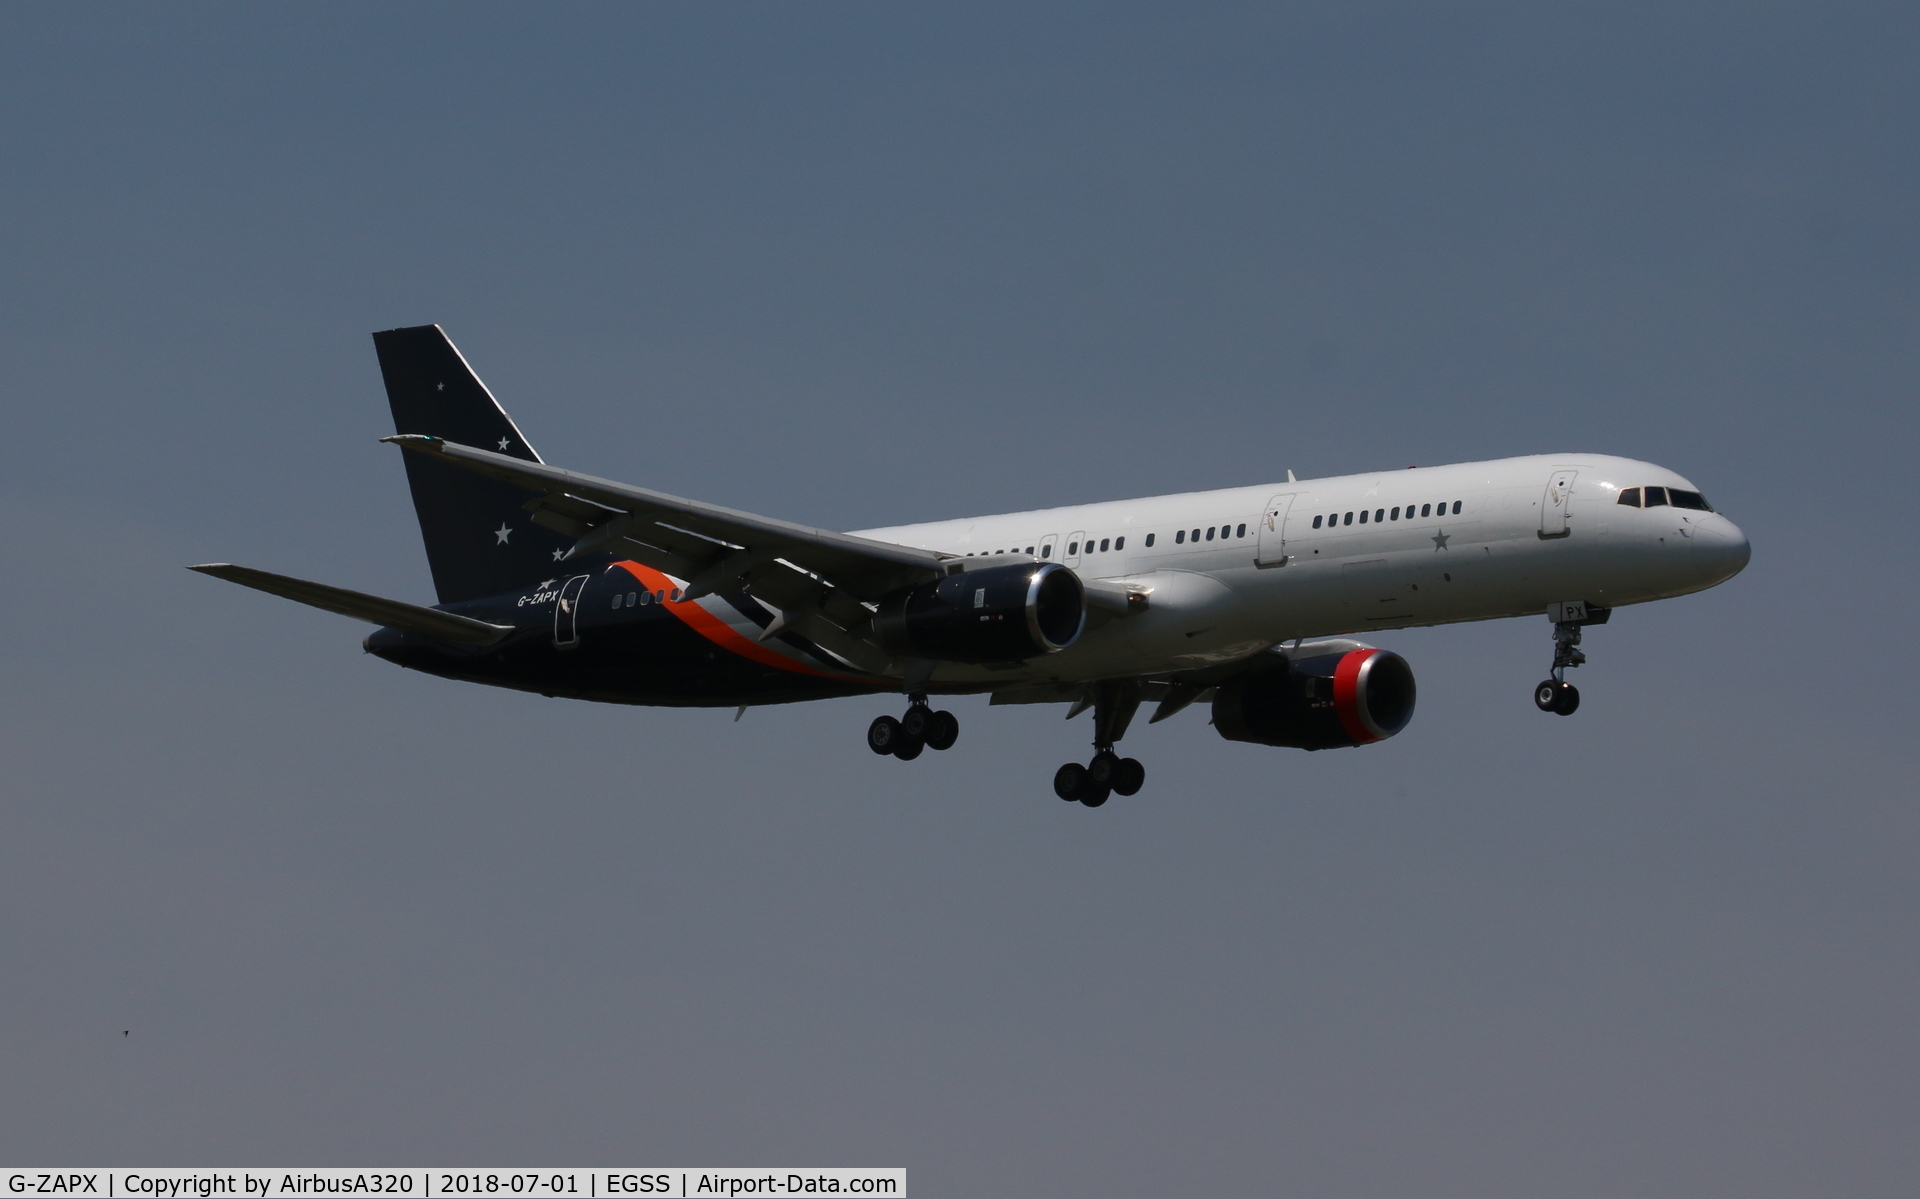 G-ZAPX, 2000 Boeing 757-256 C/N 29309, Arriving London Stansted